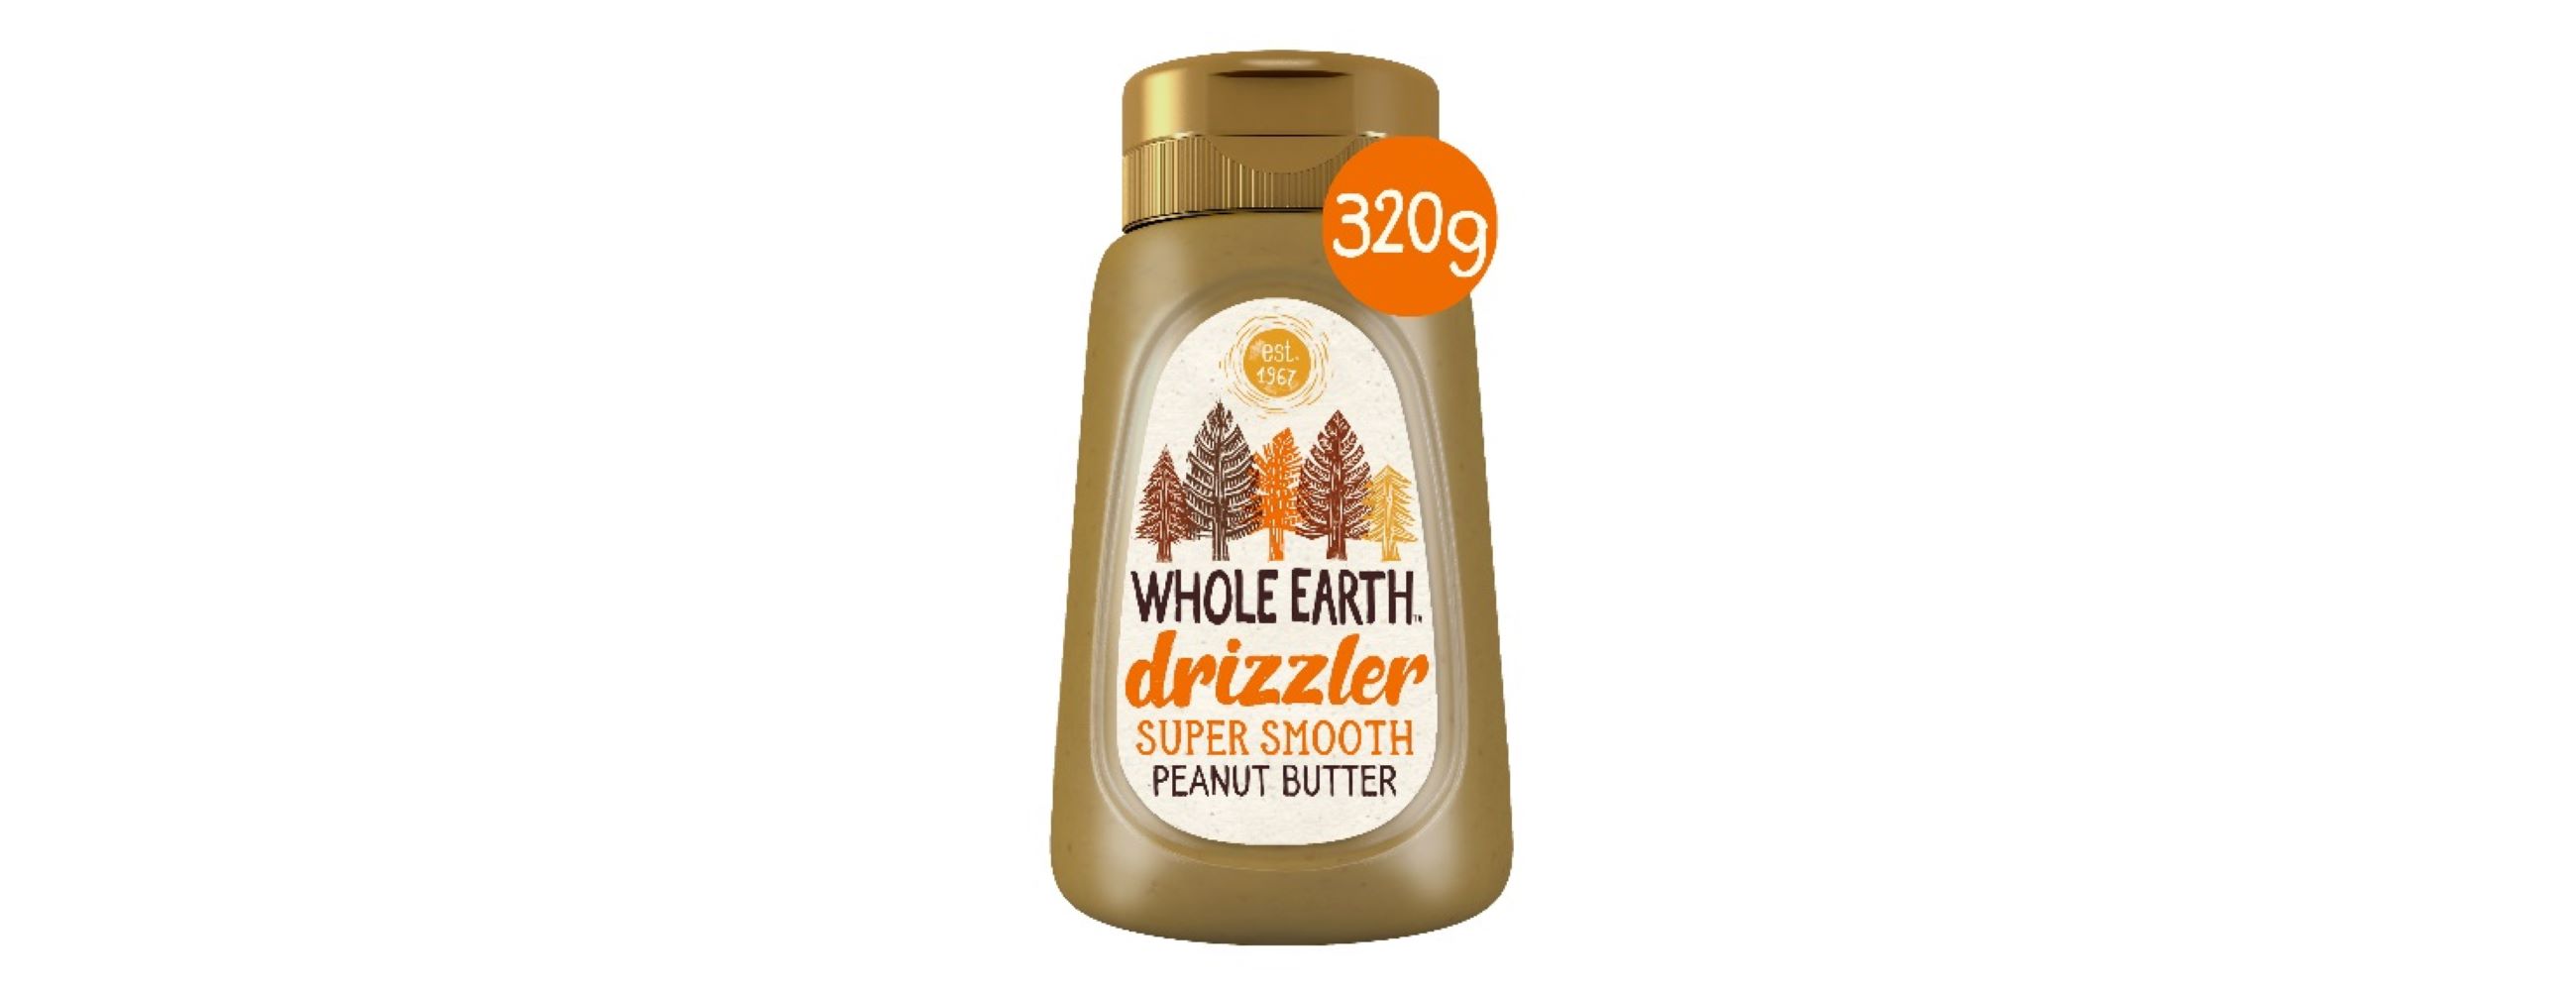 FREE Orig Drizzler Nut Butter